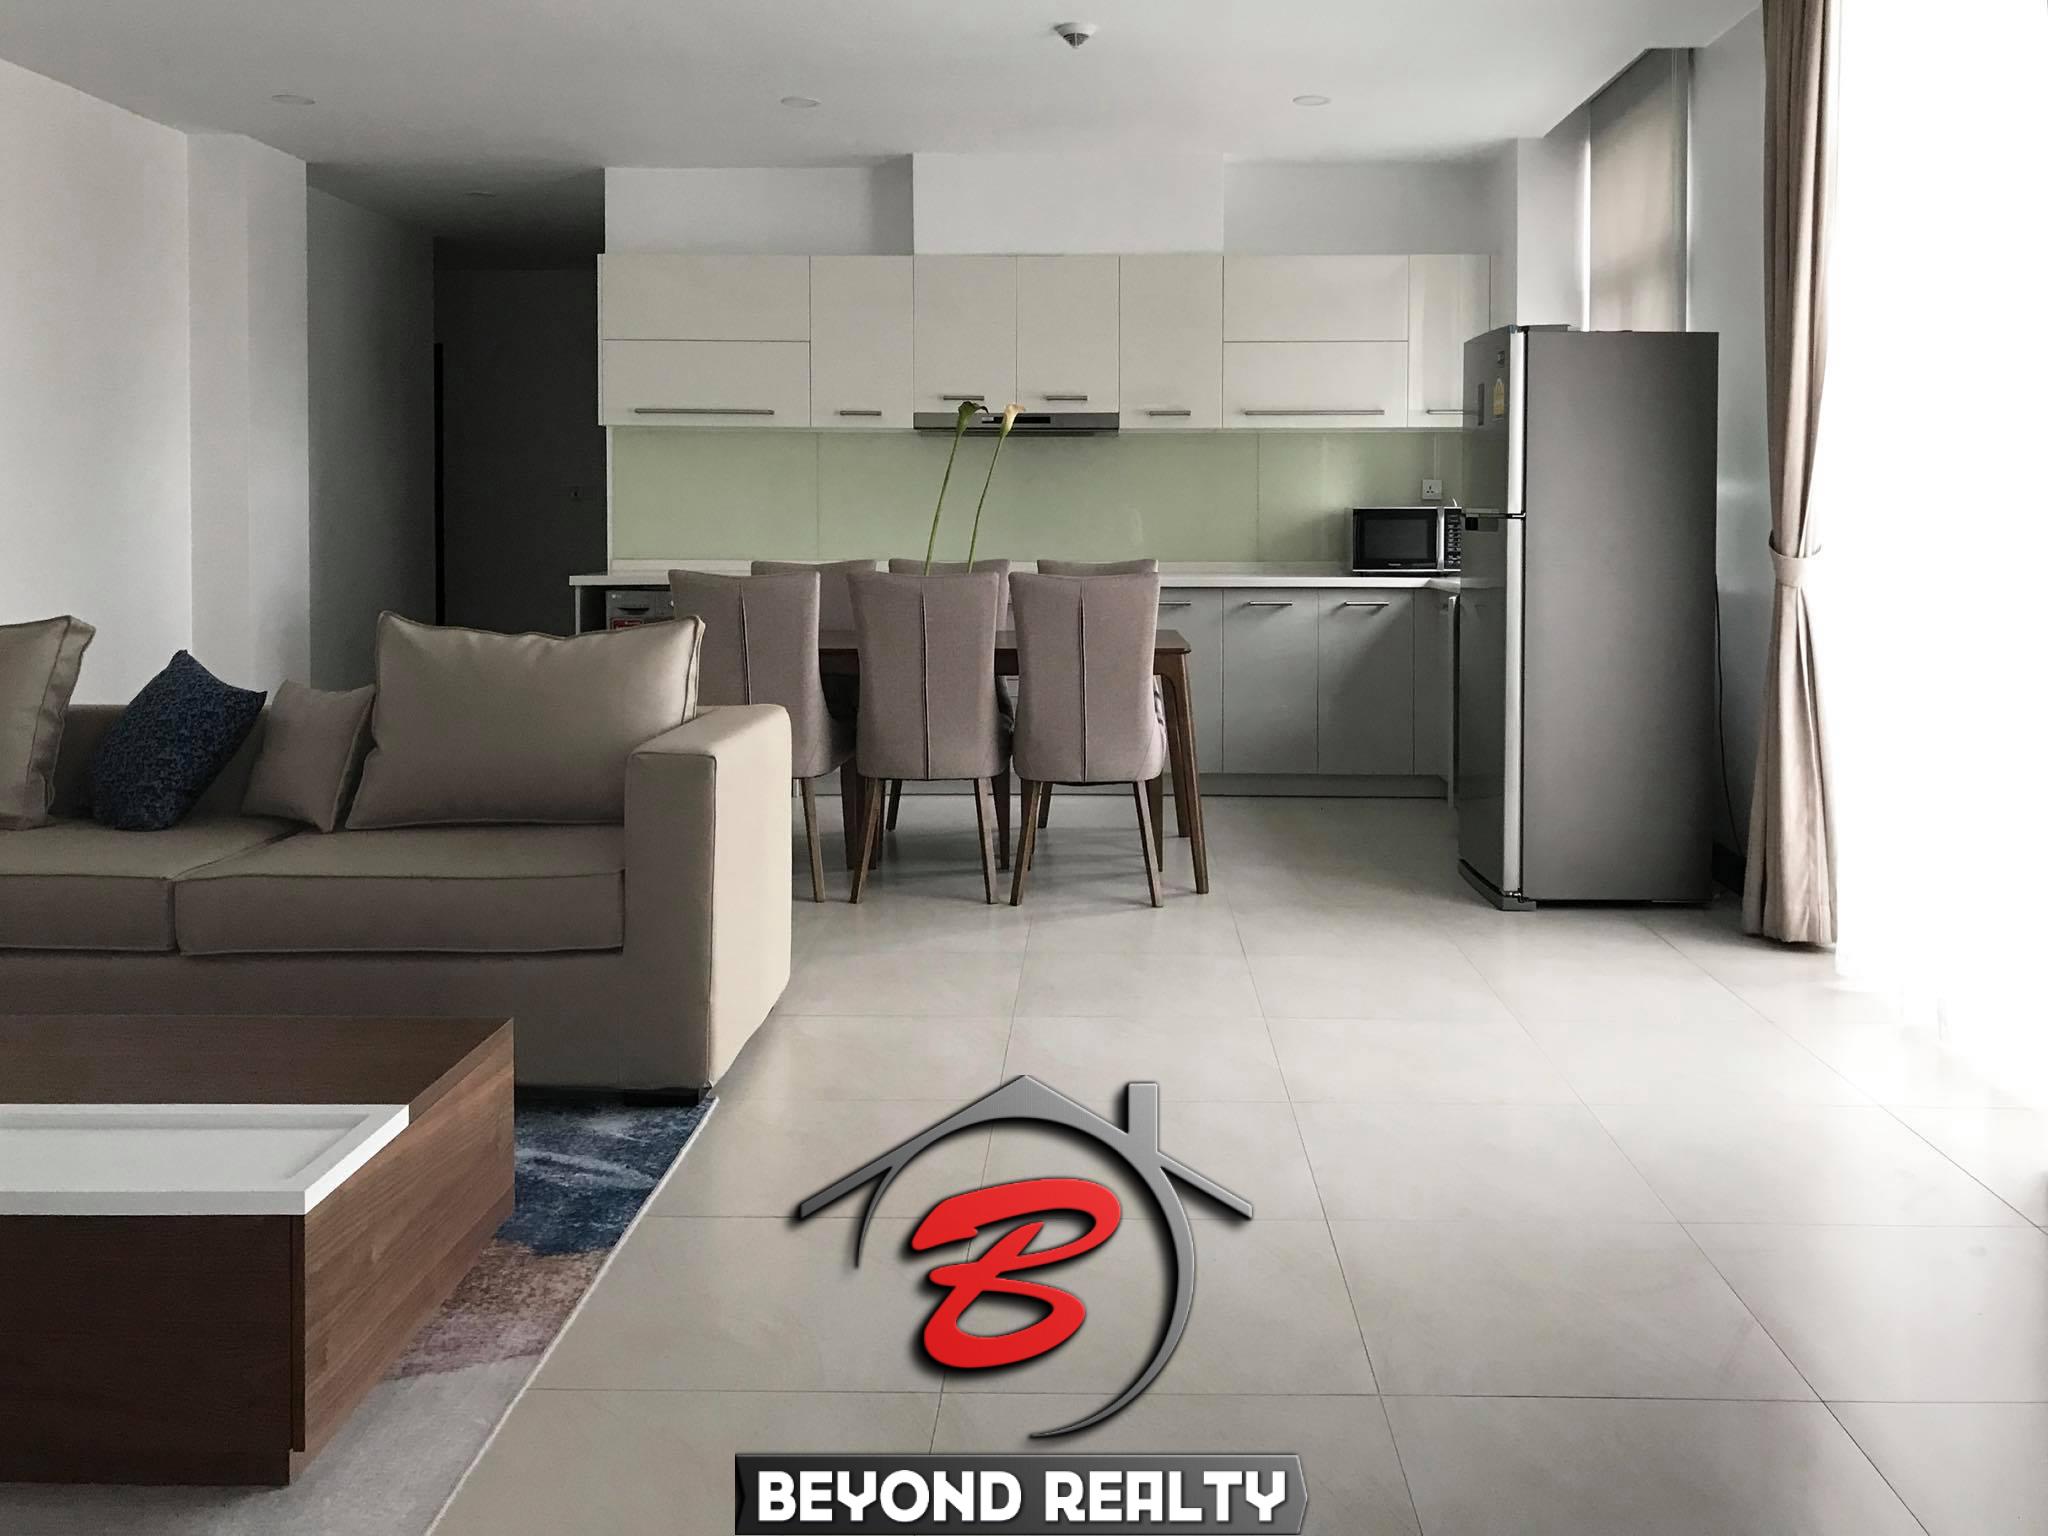 the living room and the kitchen of the 3br luxury serviced condo for rent in Sangkat Srah Chak in Daun Penh in Phnom Penh Cambodia